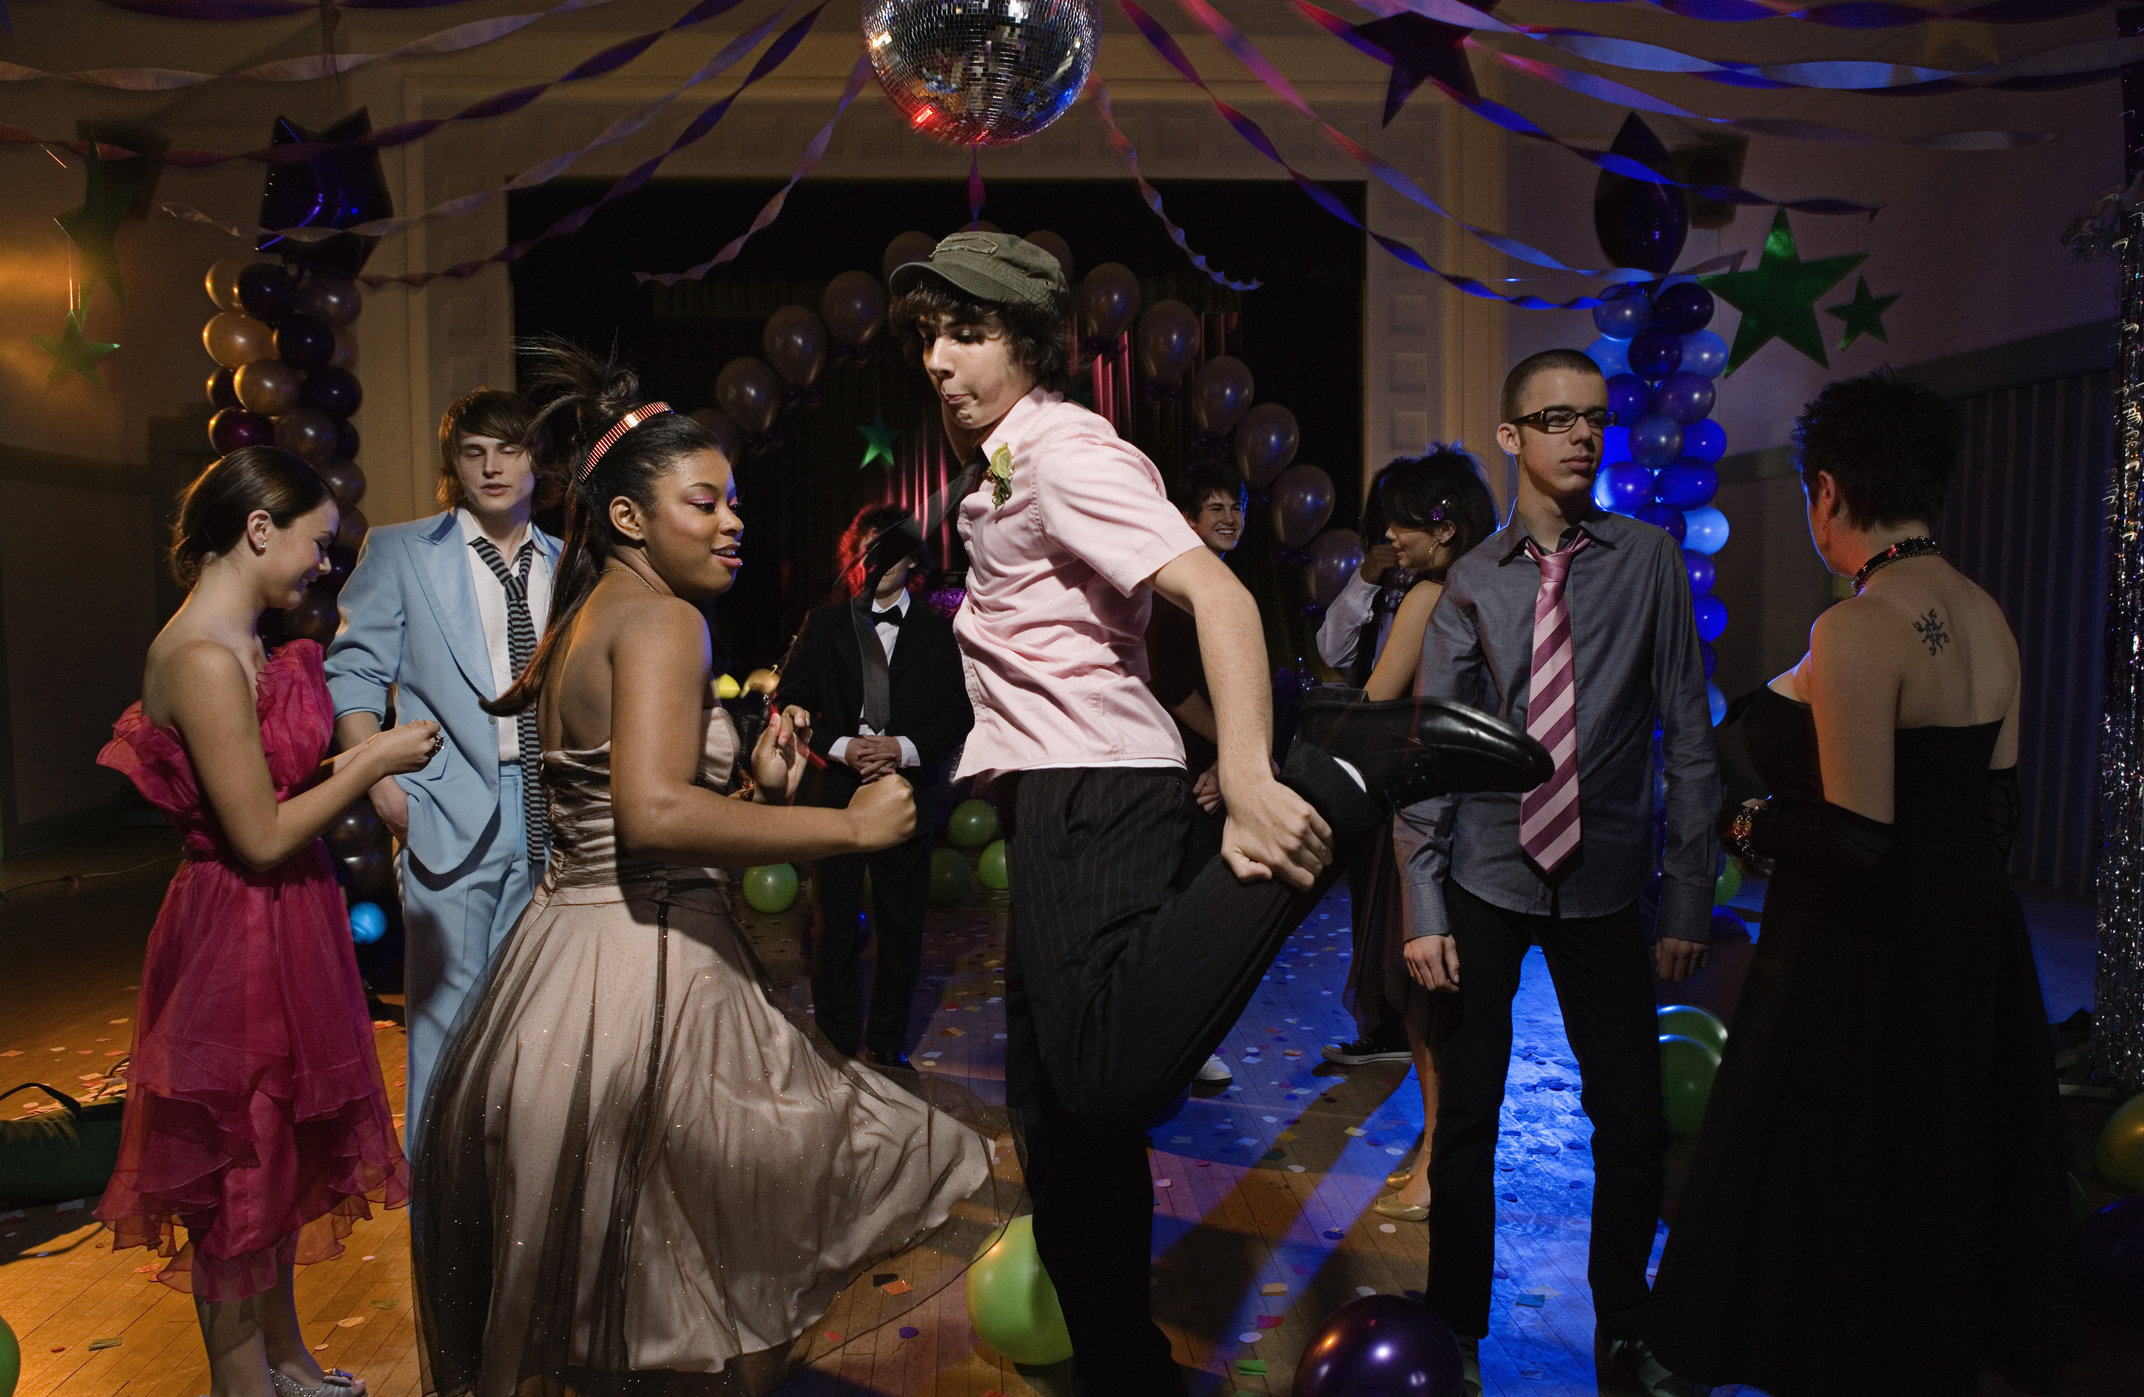 Is prom worth it, or should you forego it? The old-school tradition ...